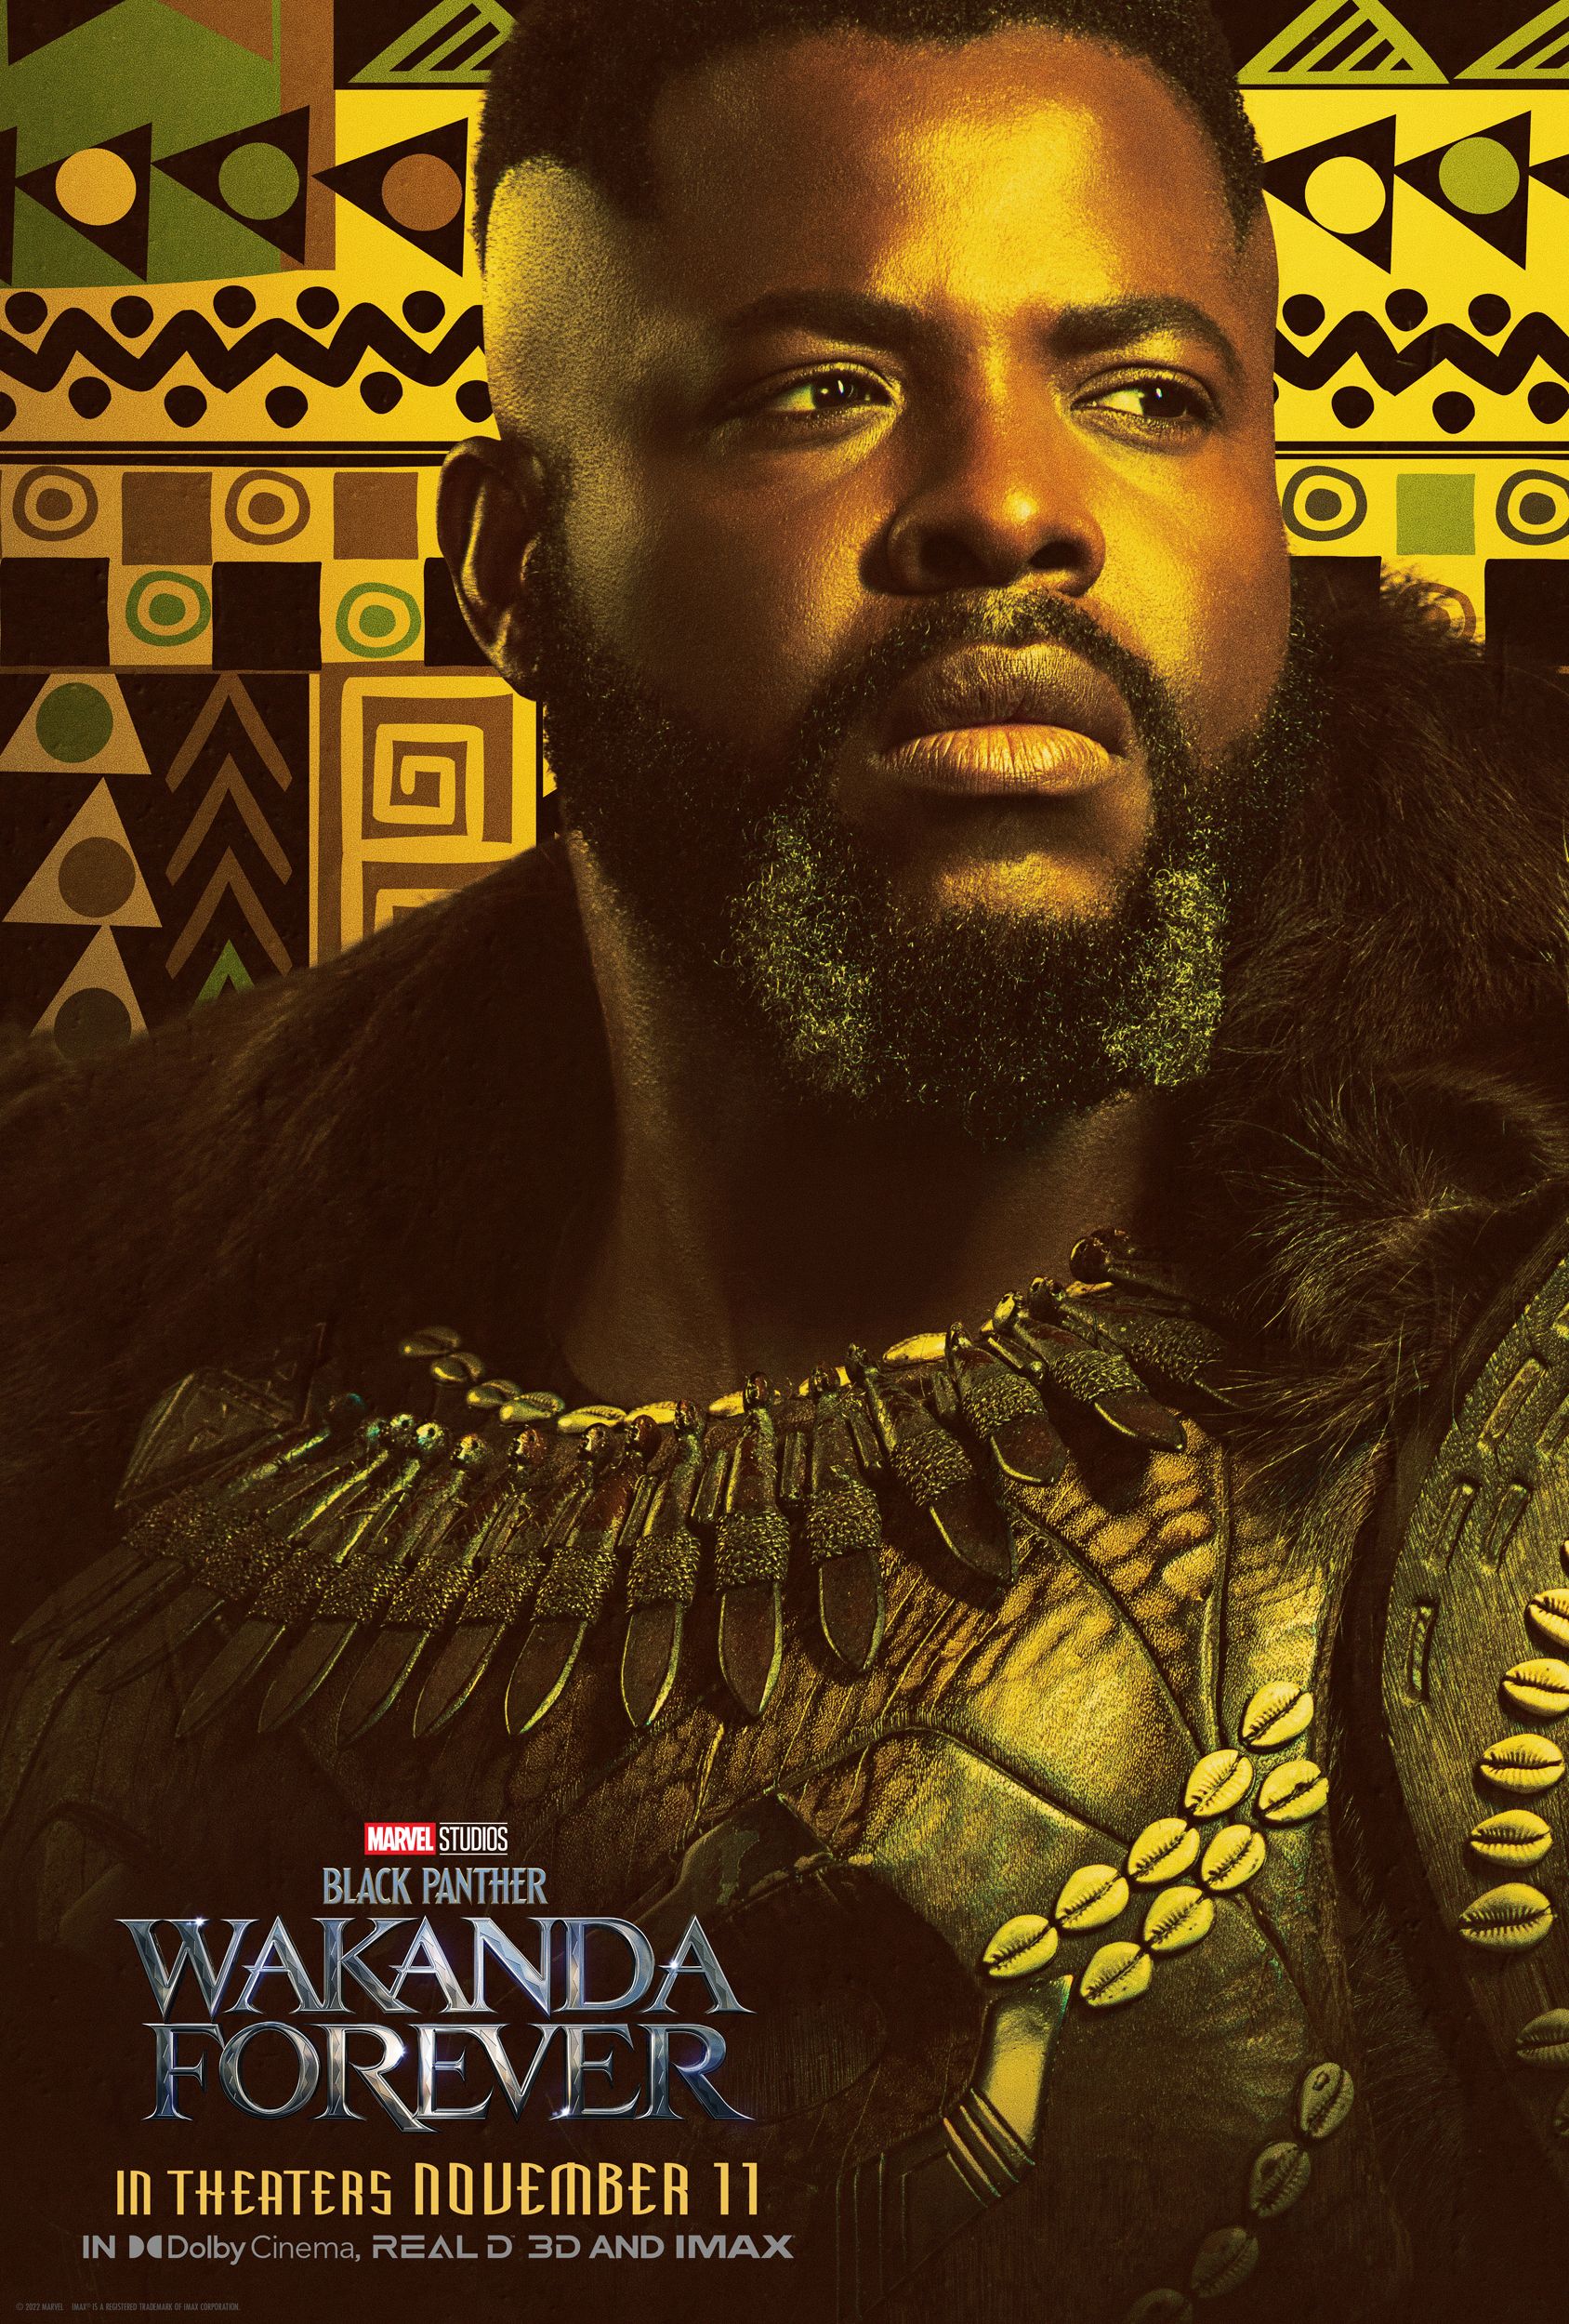 Winston Duke in a poster for Black Panther: Wakanda Forever